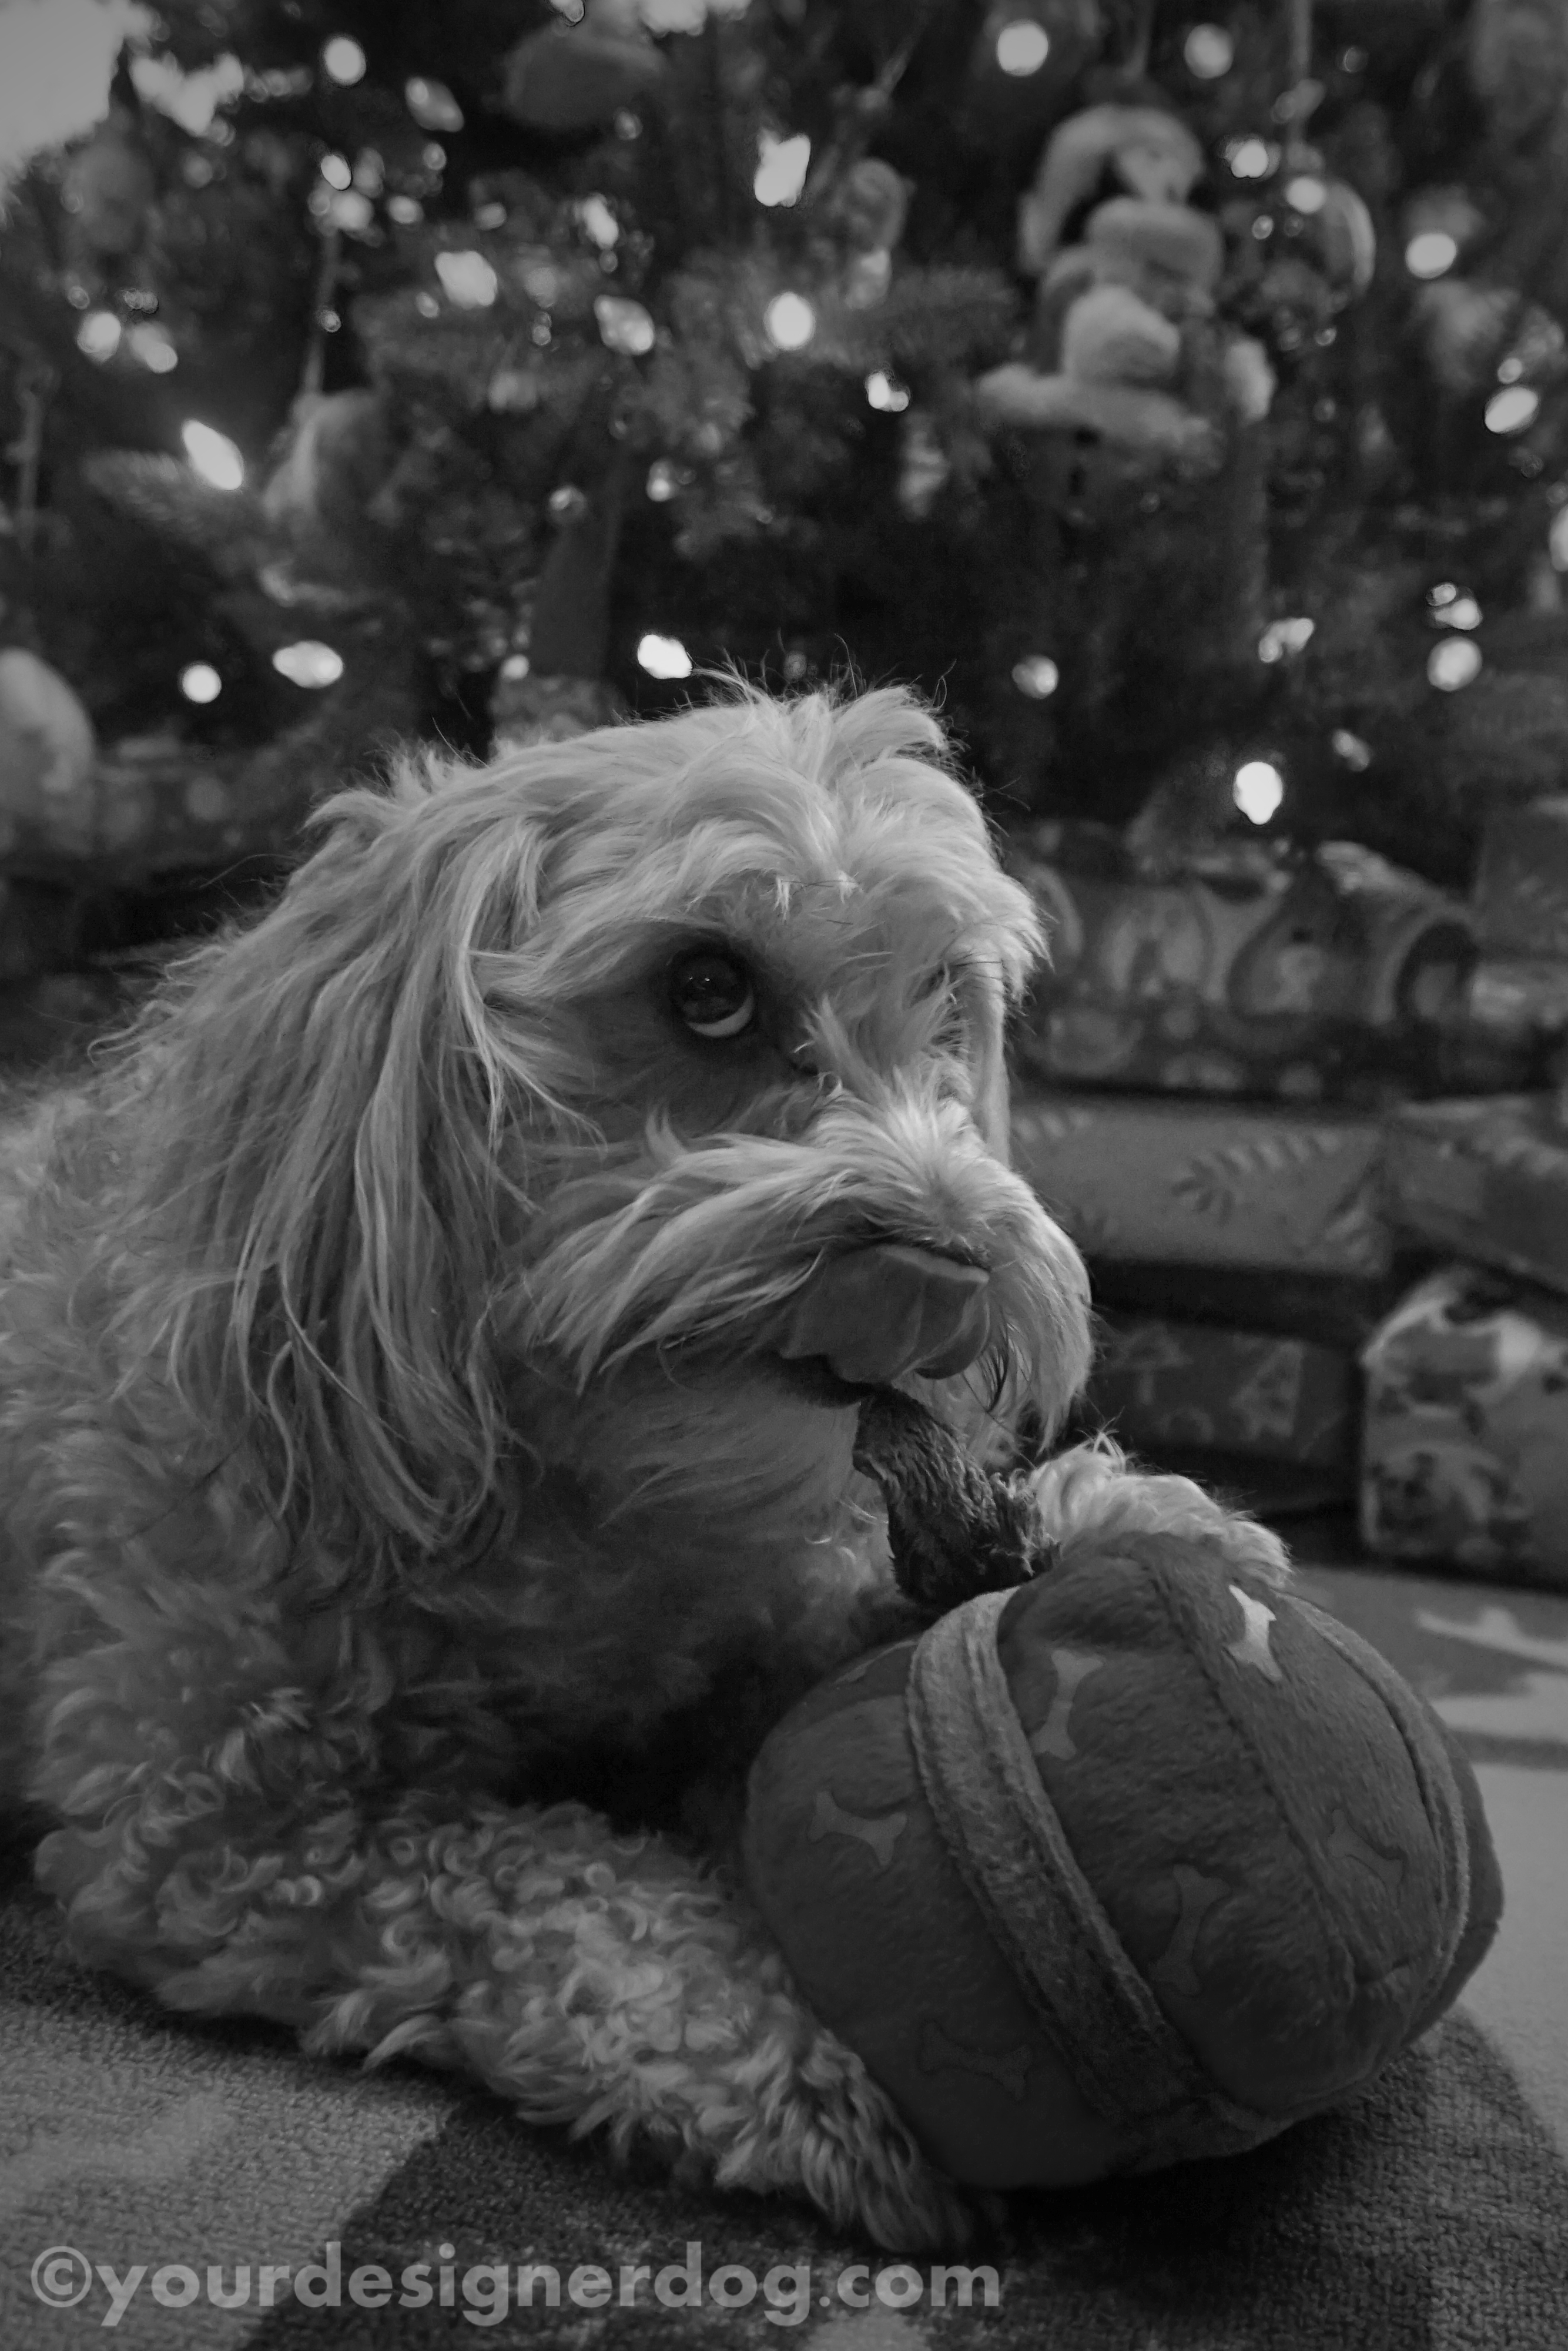 dogs, designer dogs, dog toy, tongue out, yorkipoo, yorkie poo, black and white photography, christmas present